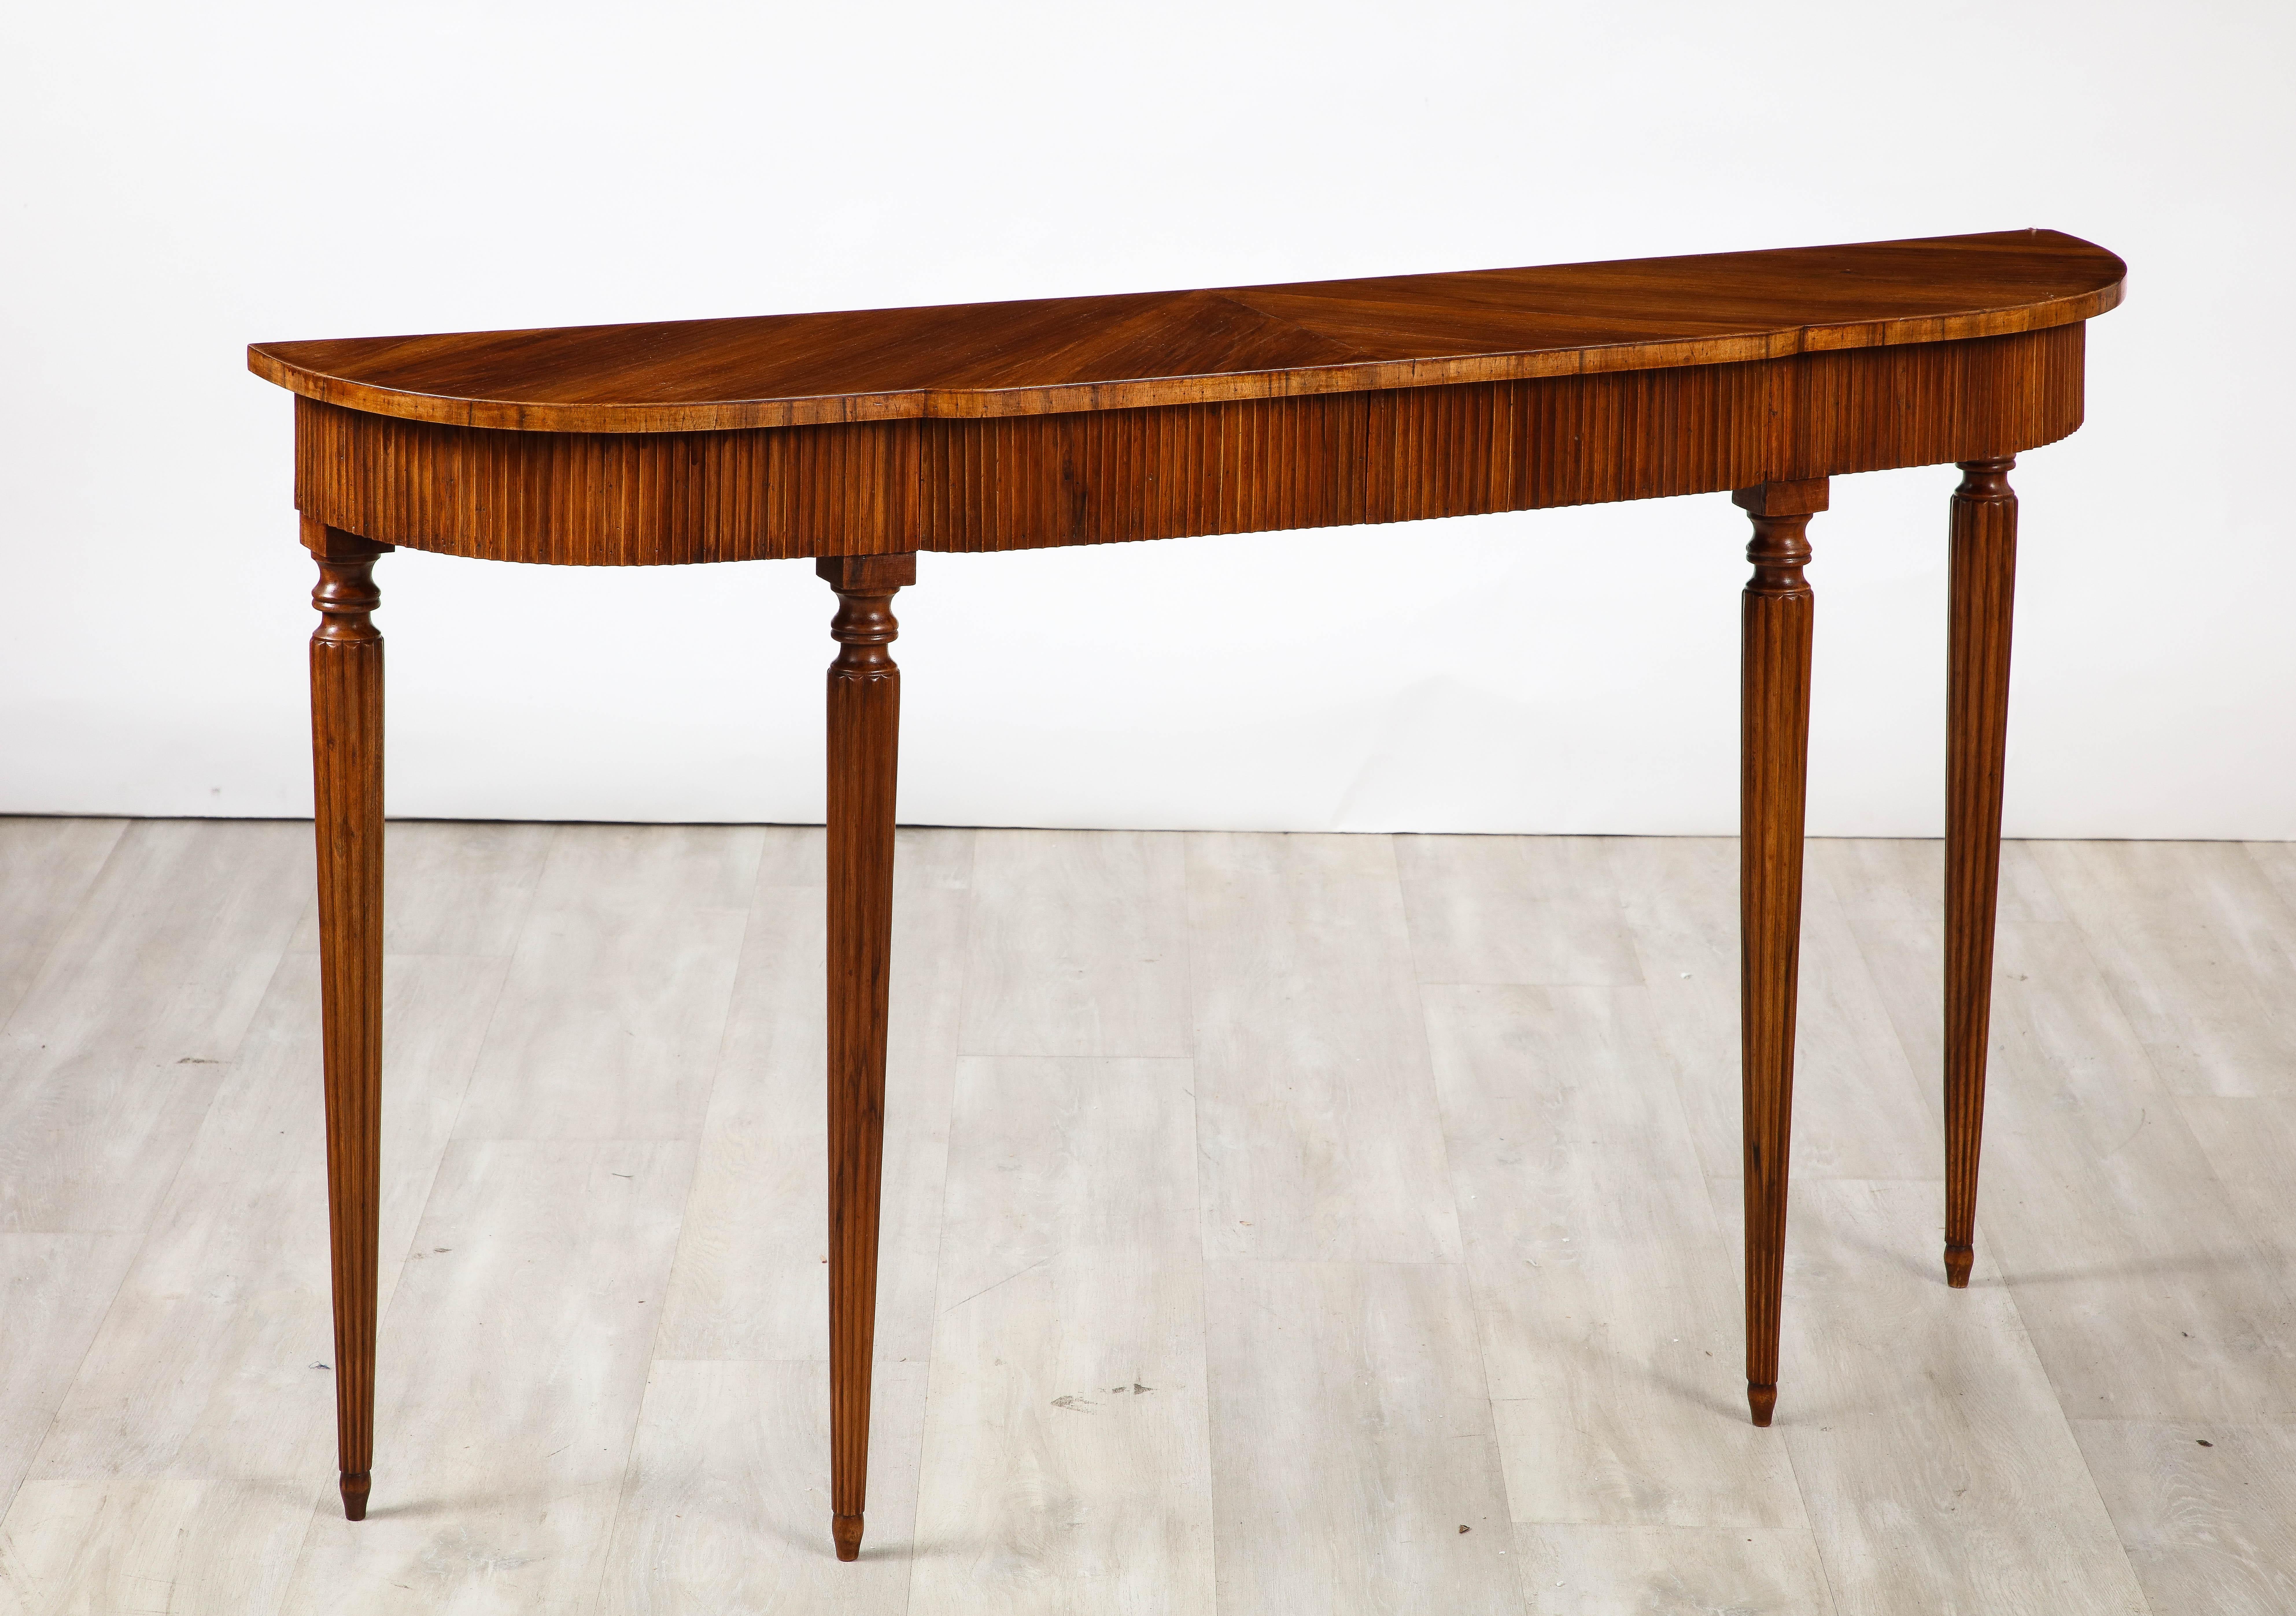 Italian Walnut Carved Console Table with Two Drawers, Italy circa 1930 For Sale 3